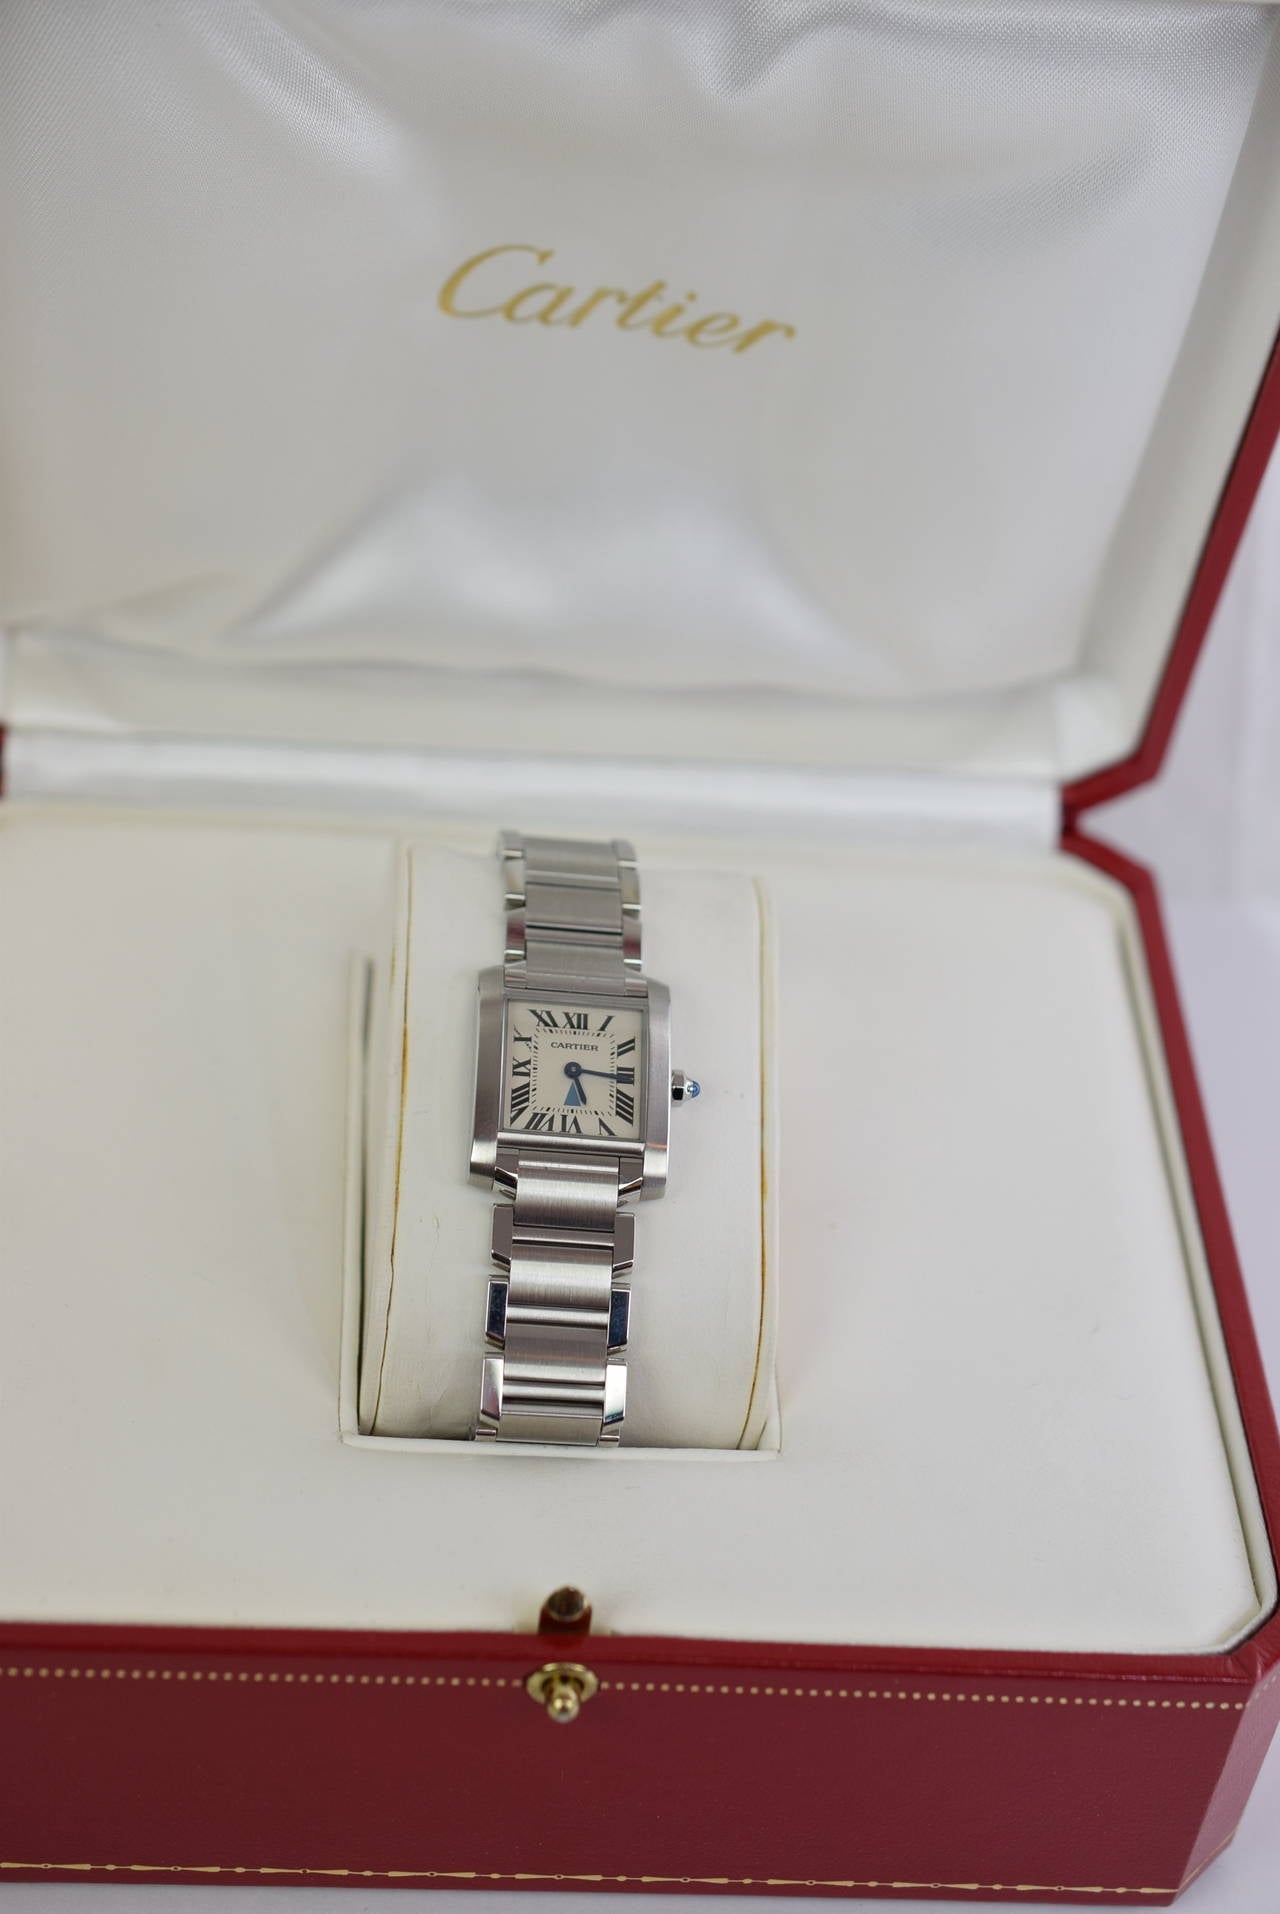 Cartier Tank Francaise Stainless Steel Quartz Ladys Watch .Circa :2007-2010 .
Excellent Condition and 